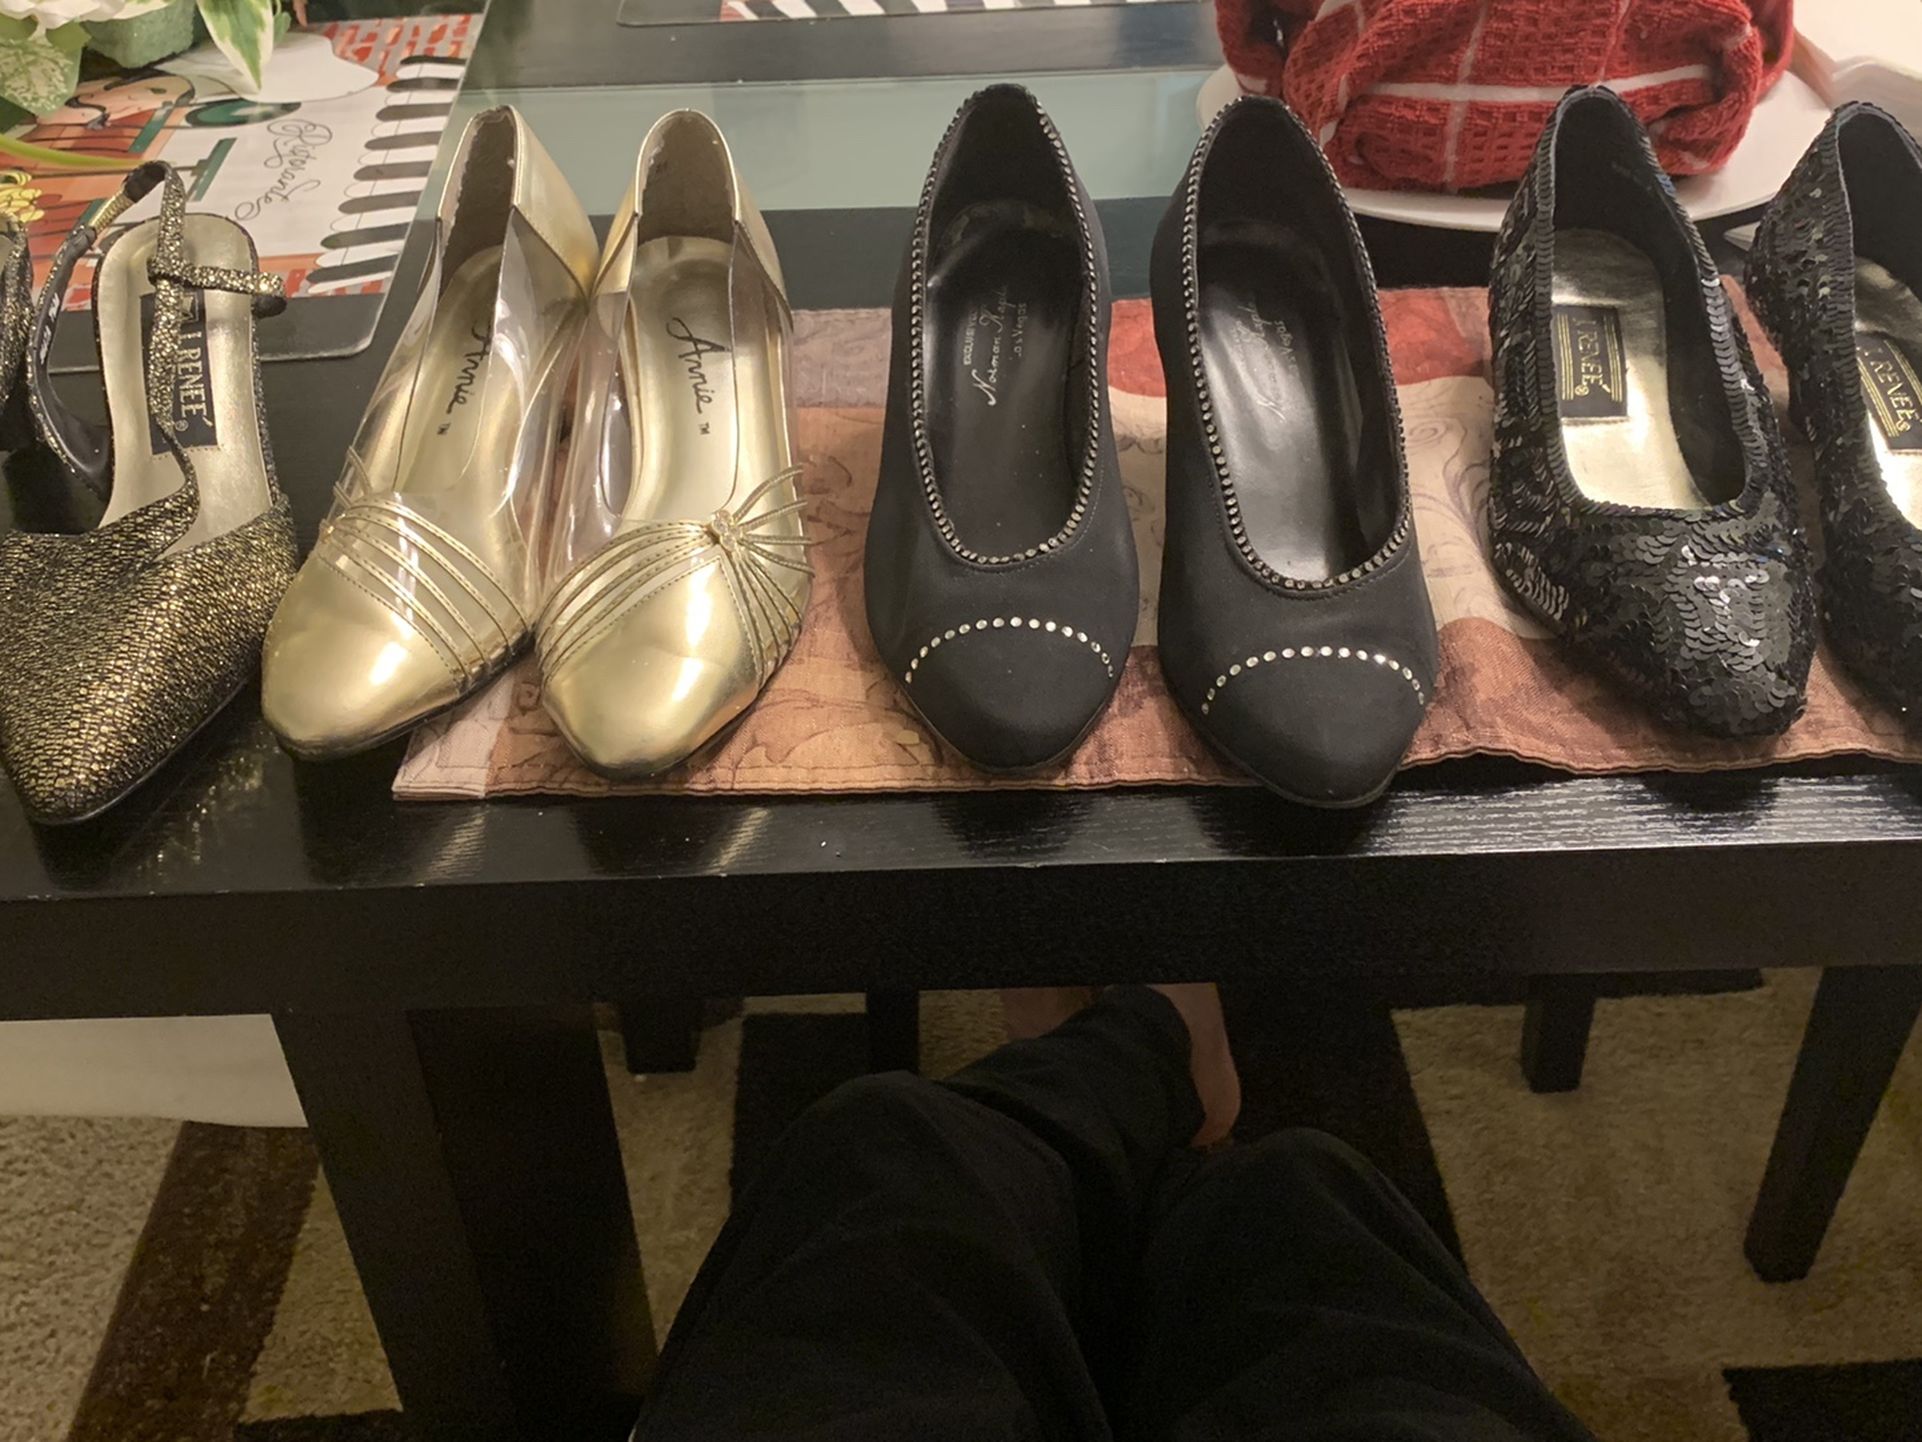 4 Pairs Low Heels For $40